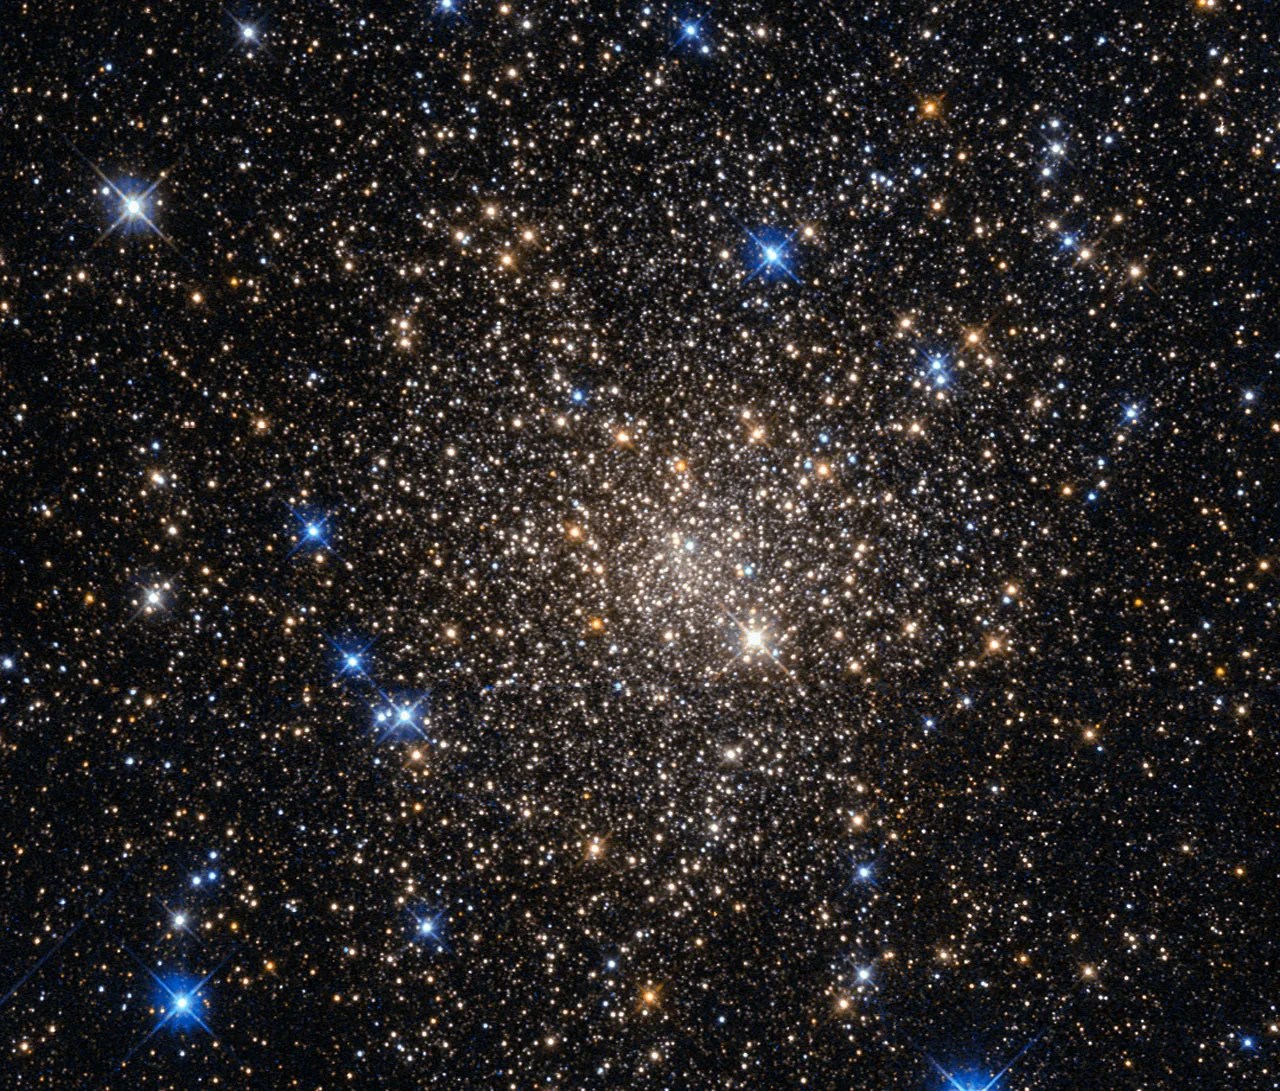 A globular cluster consisting of around a hundred thousand stars